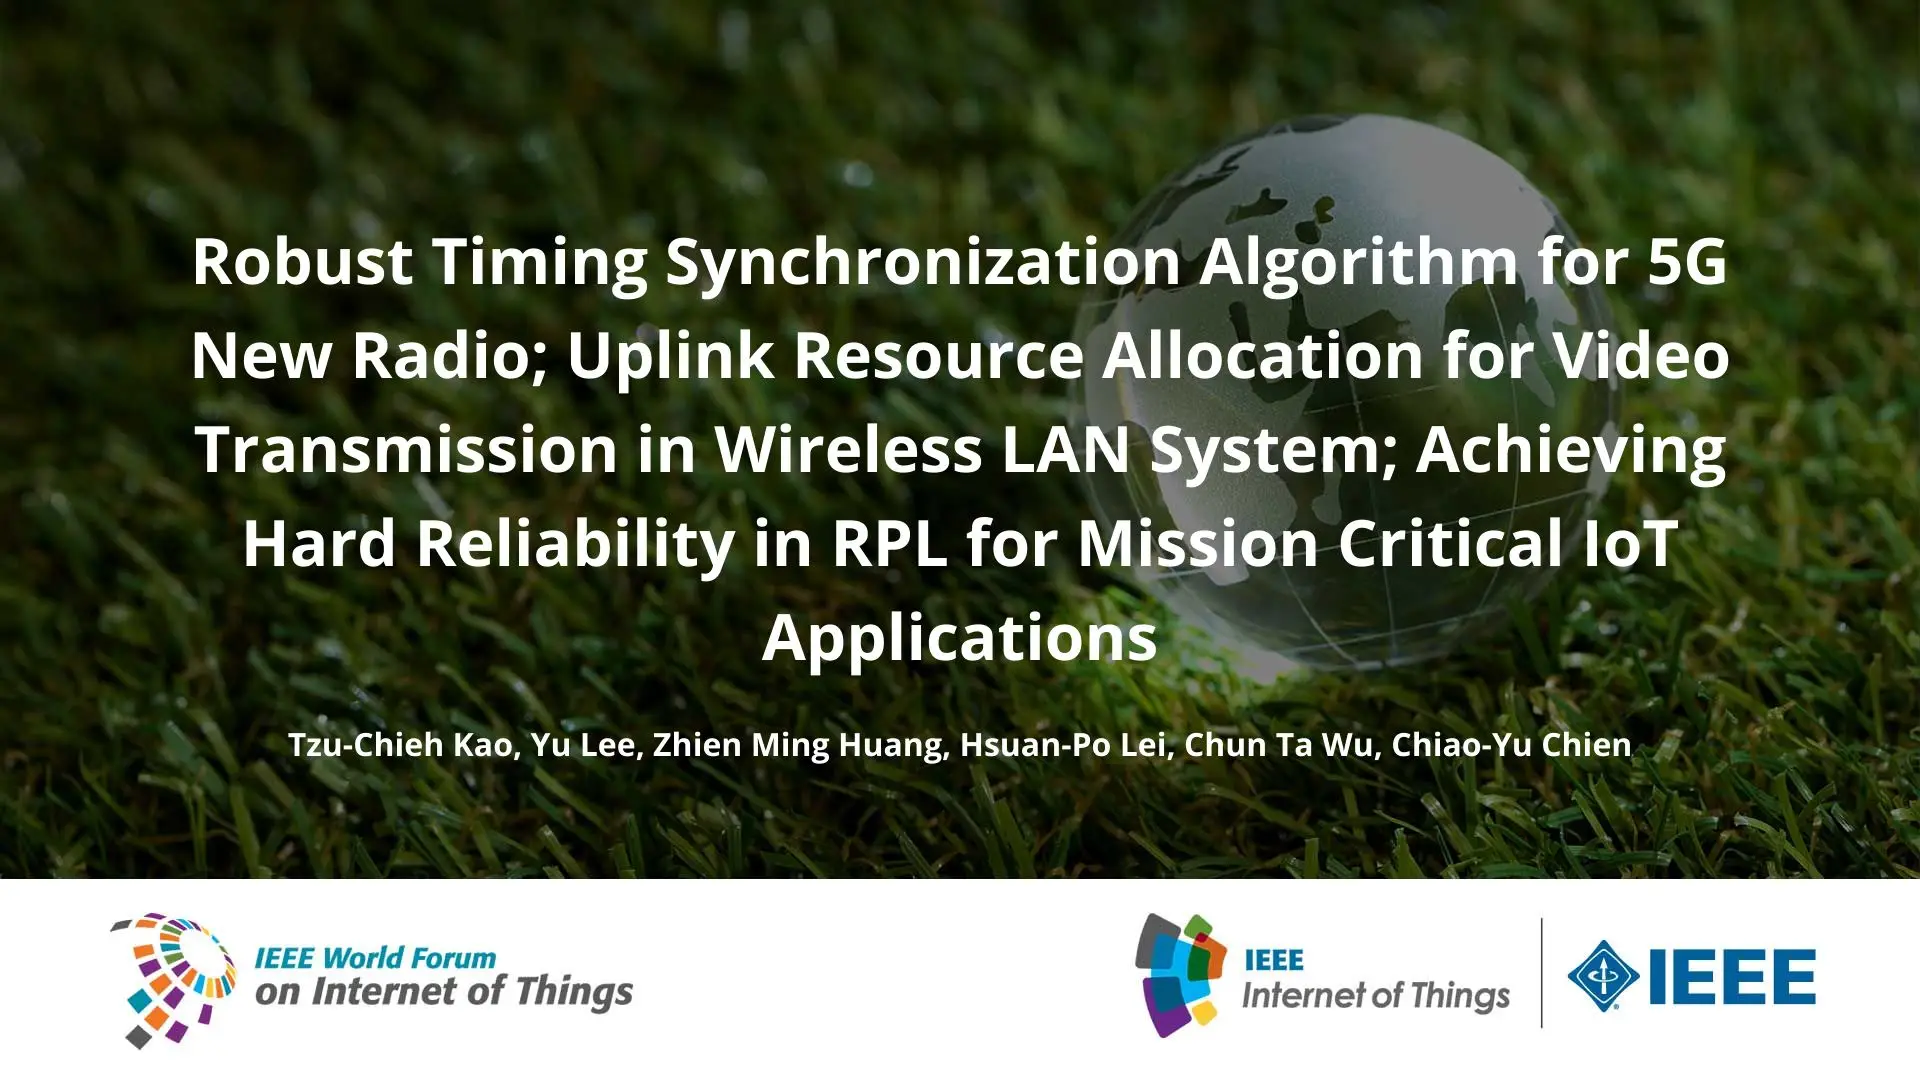 Robust Timing Synchronization Algorithm for 5G New Radio; Uplink Resource Allocation for Video Transmission in Wireless LAN System; Achieving Hard Reliability in RPL for Mission Critical IoT Applications